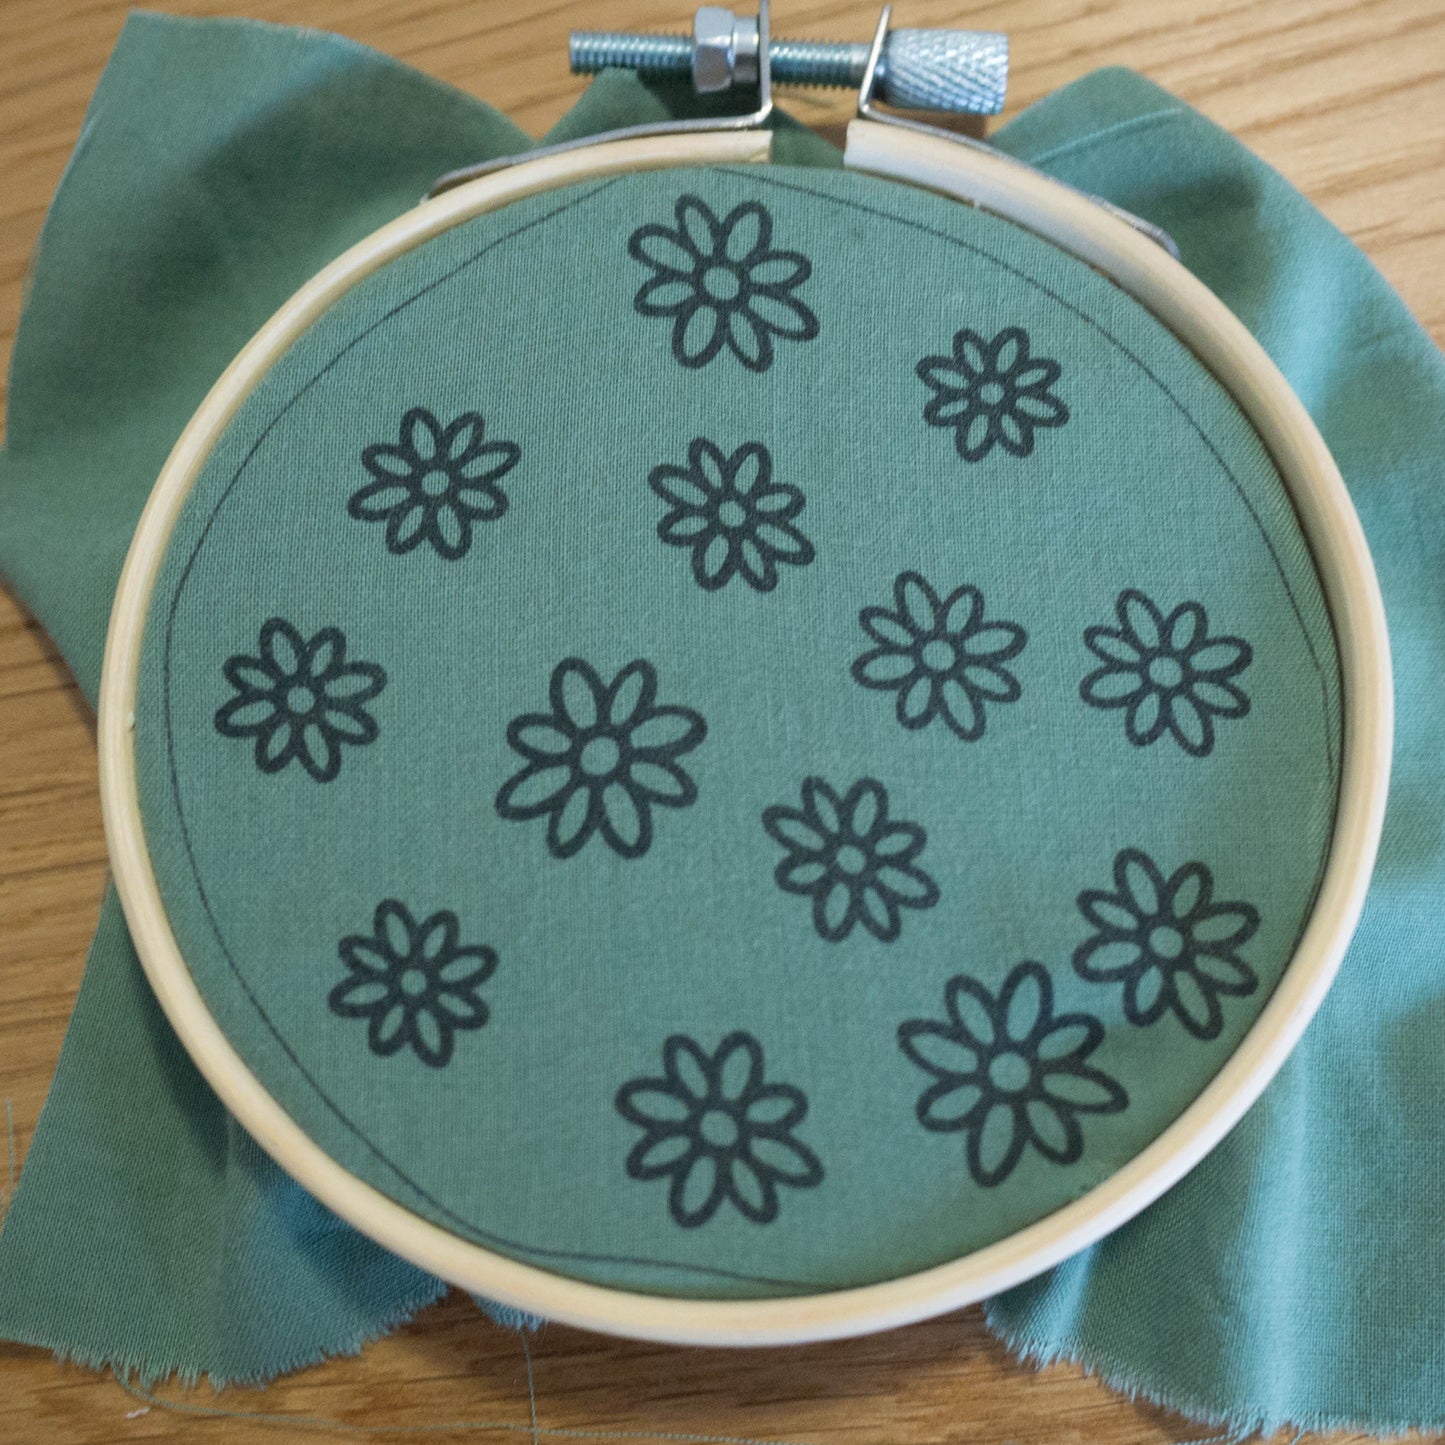 4" Hoop Embroidery Kit with 3" Hanging Frame